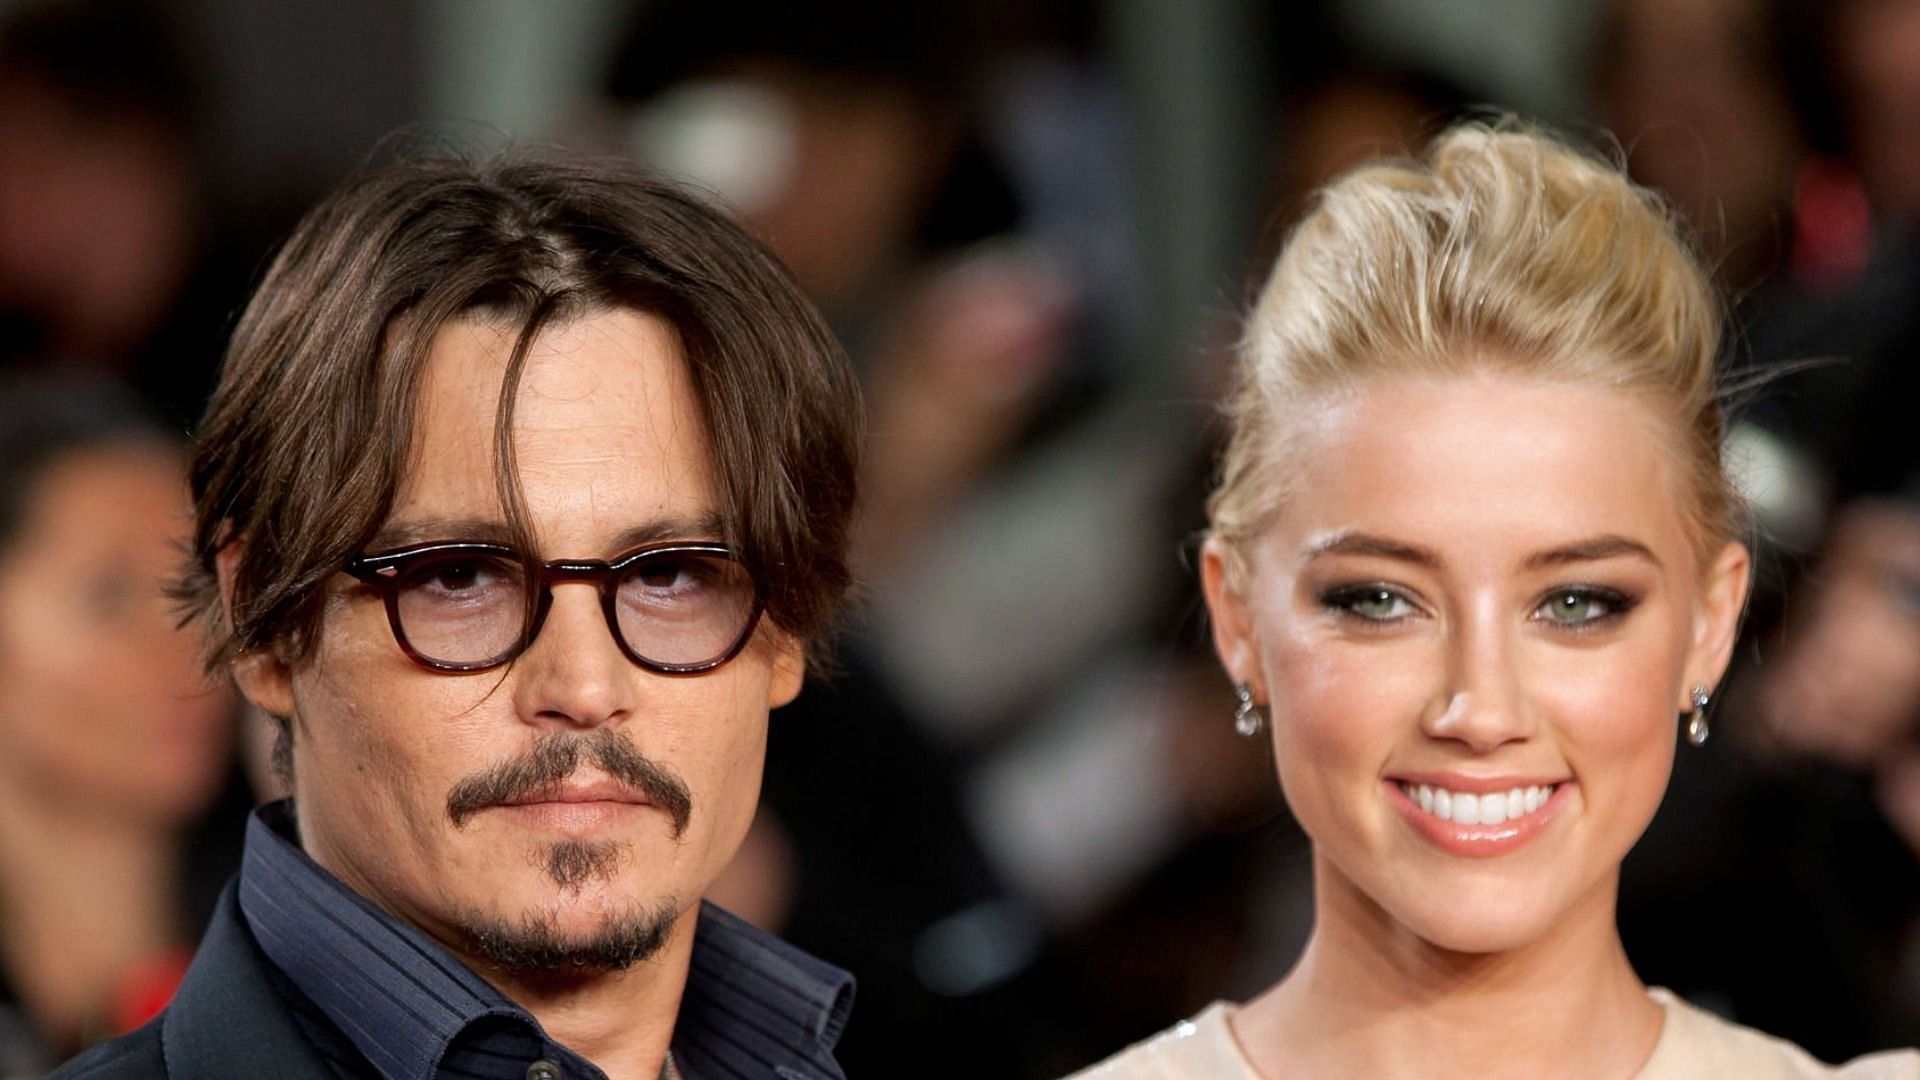 The Johnny Depp vs. Amber Heard defamation trial concluded on May 27, with the final verdict currently pending (Image via Getty Images)